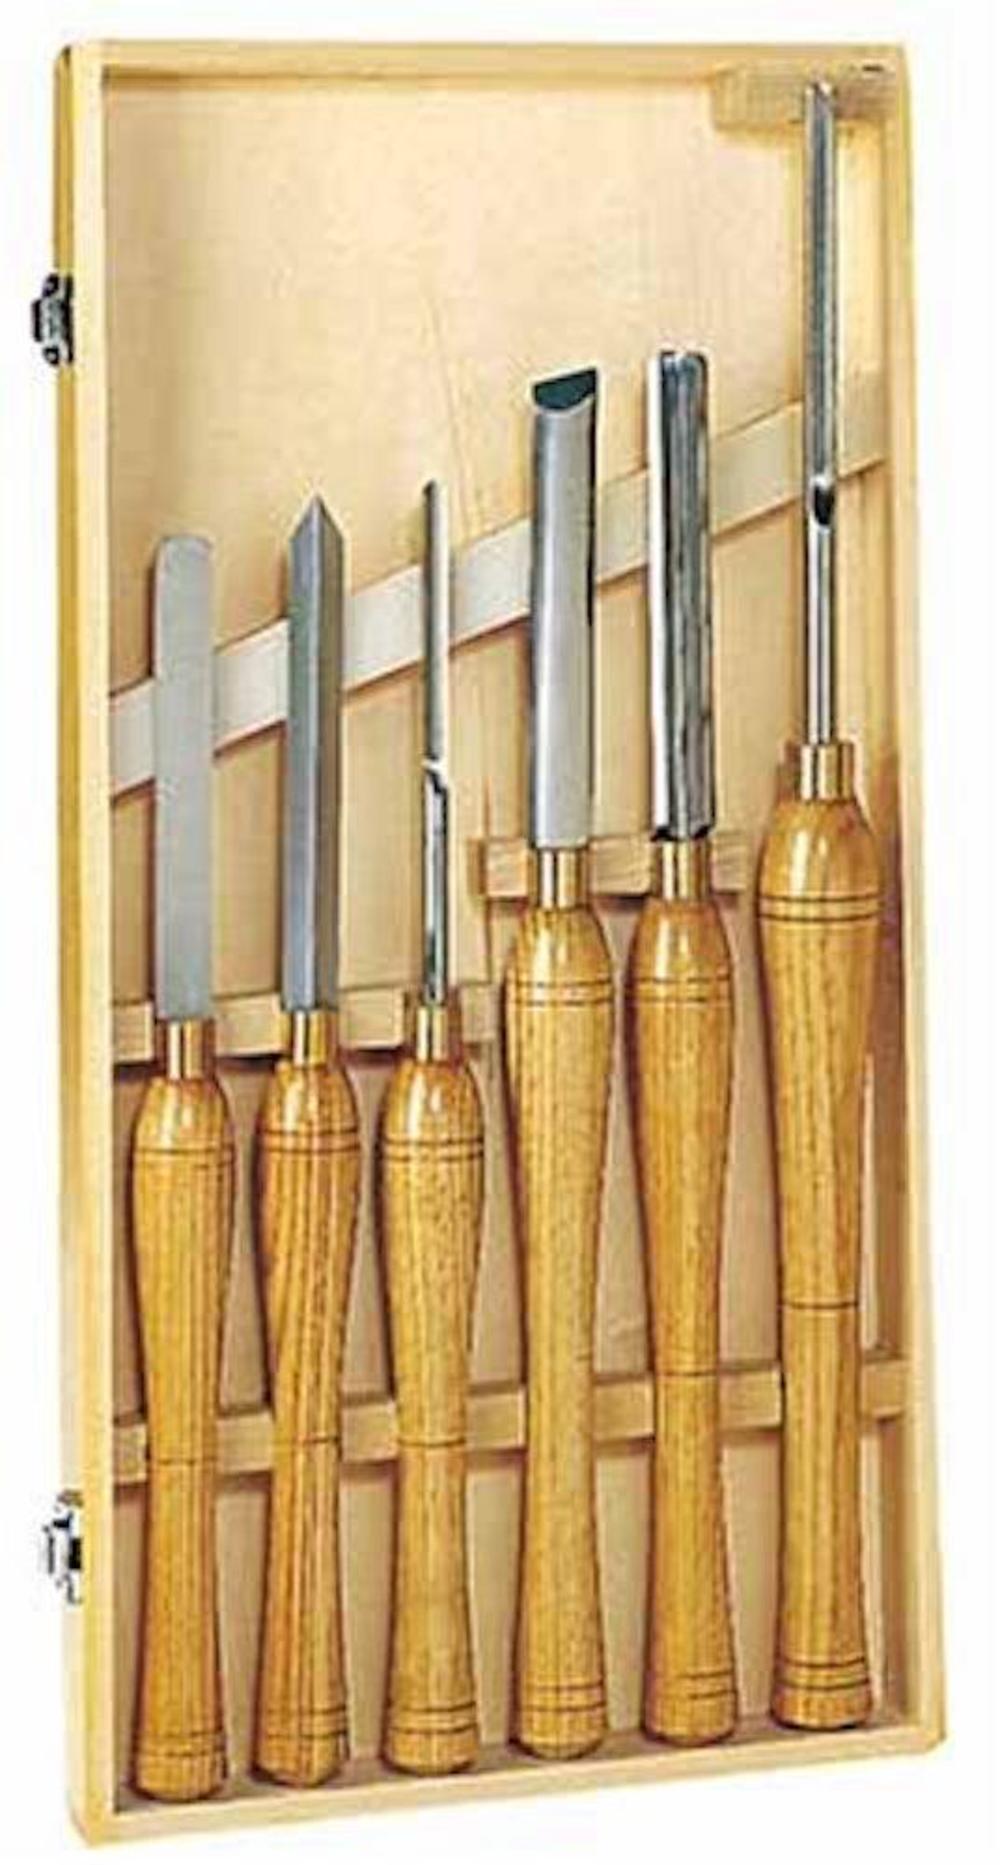 PSI Woodworking Products High Speed Steel Wood Lathe Chisel Turning Set  6-Piece LCSIXW - Acme Tools